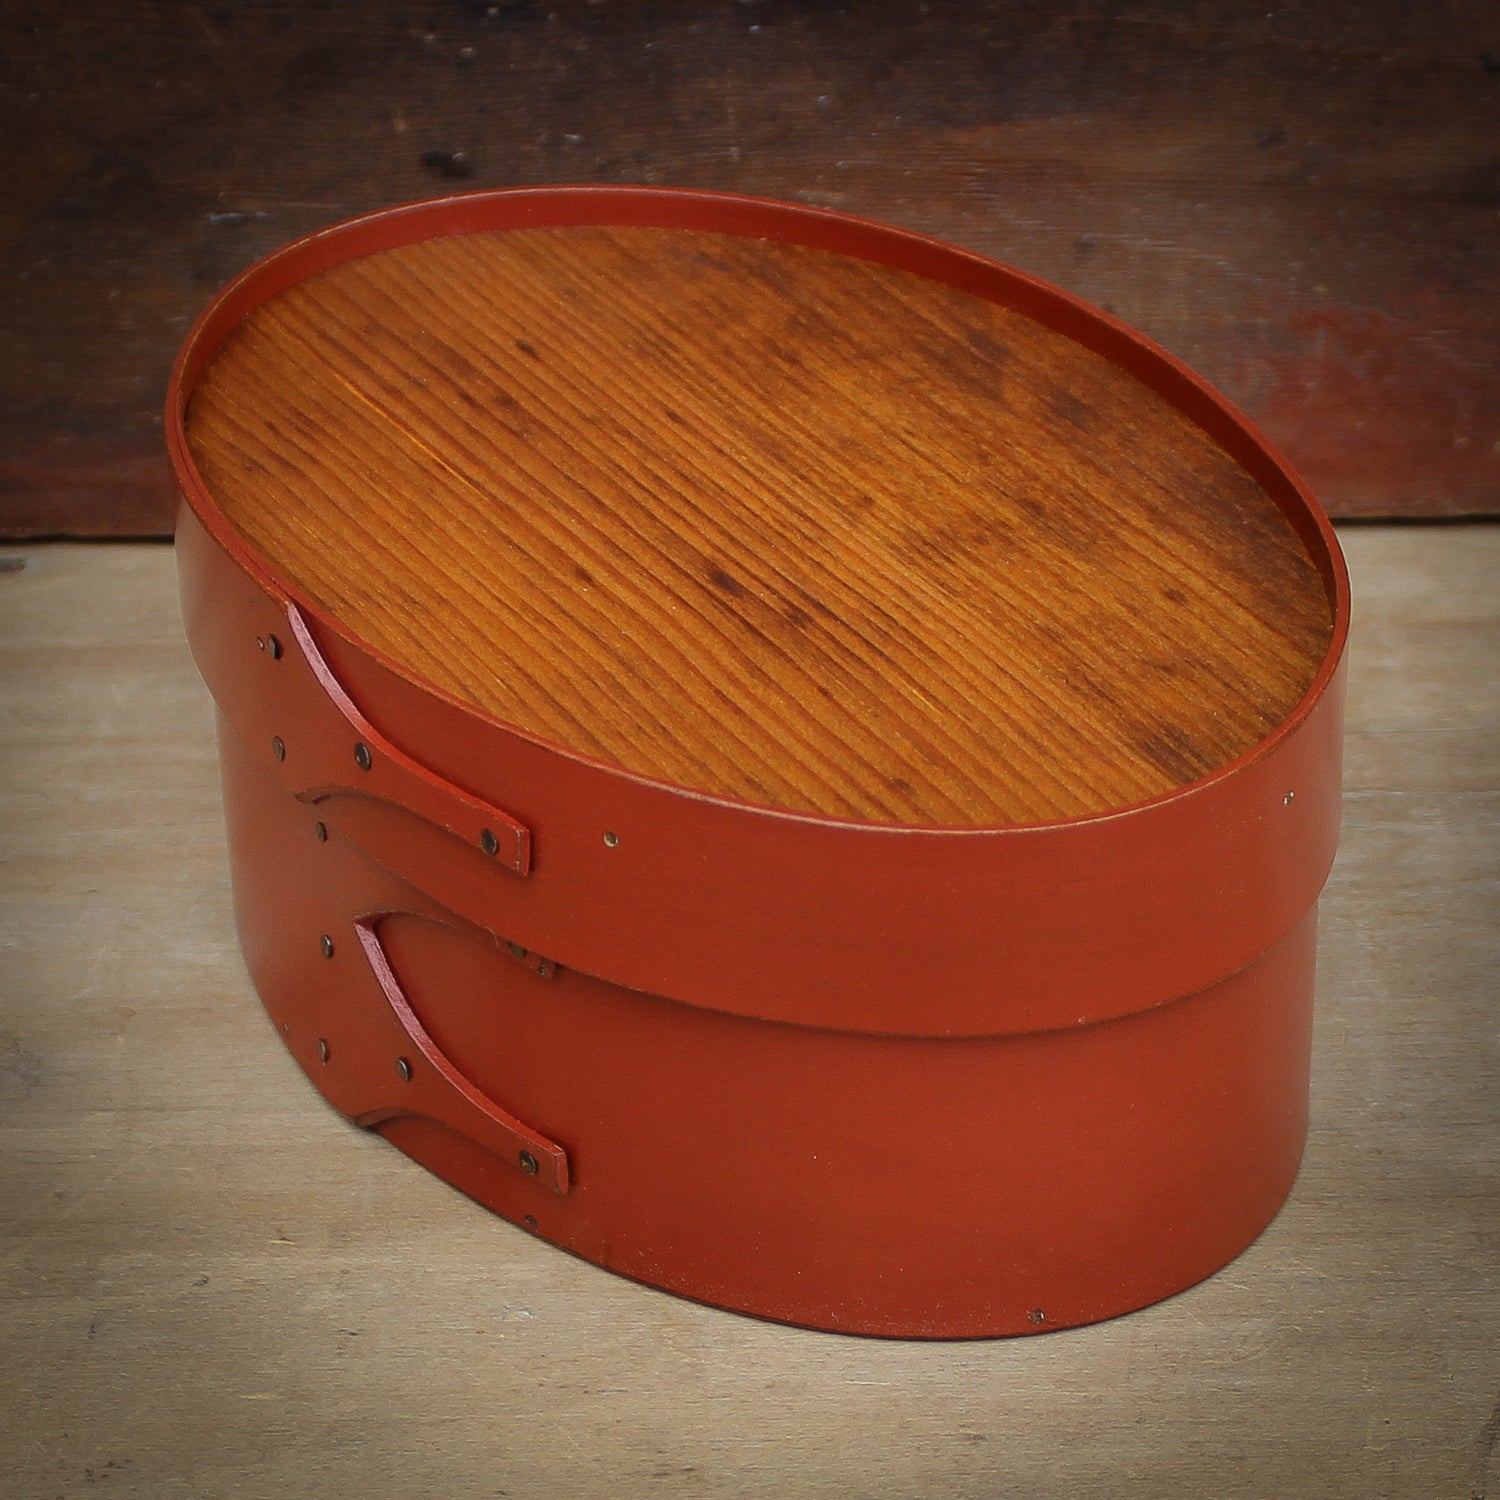 Shaker Oval Box with Recessed Lid for Needlework, Size #3, LeHays Shaker Boxes, Red Milk Paint Finish, Side View